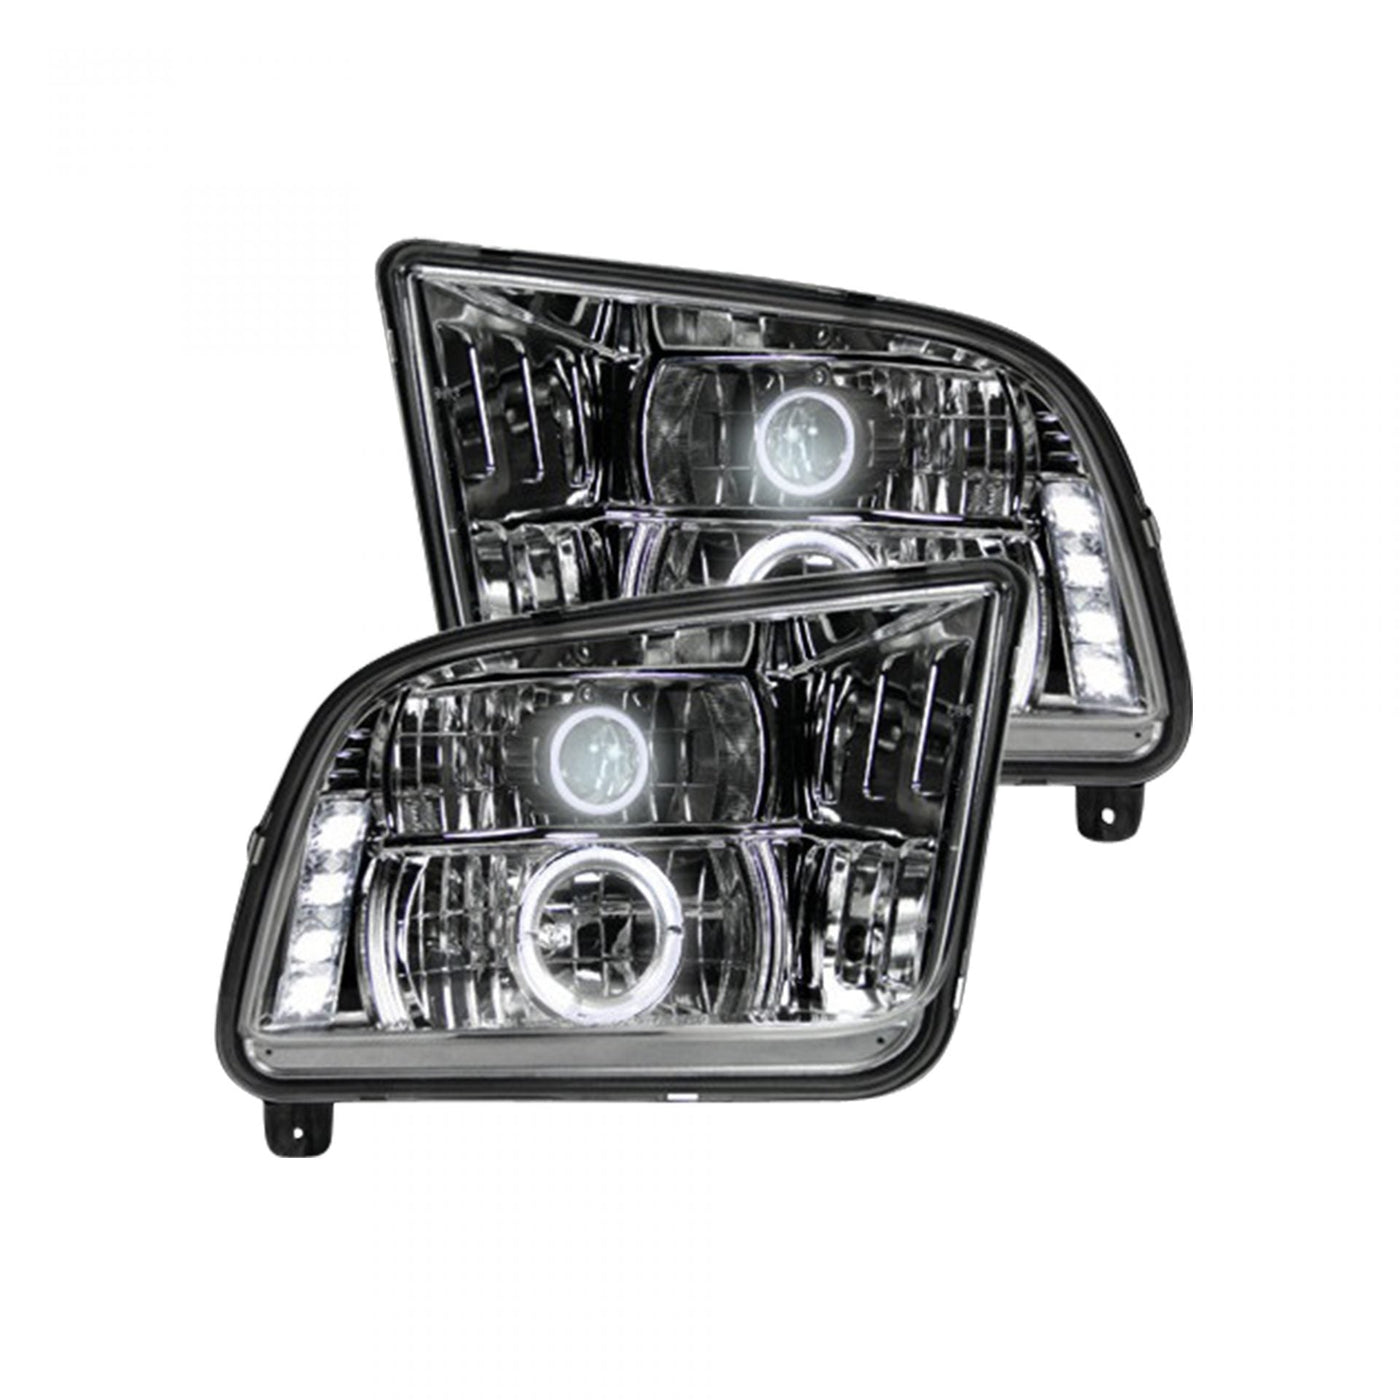 Ford Projector Headlights, Mustang Projector Headlights, Mustang 05-09 Projector Headlights, Clear/Chrome Headlights, Recon Projector Headlights